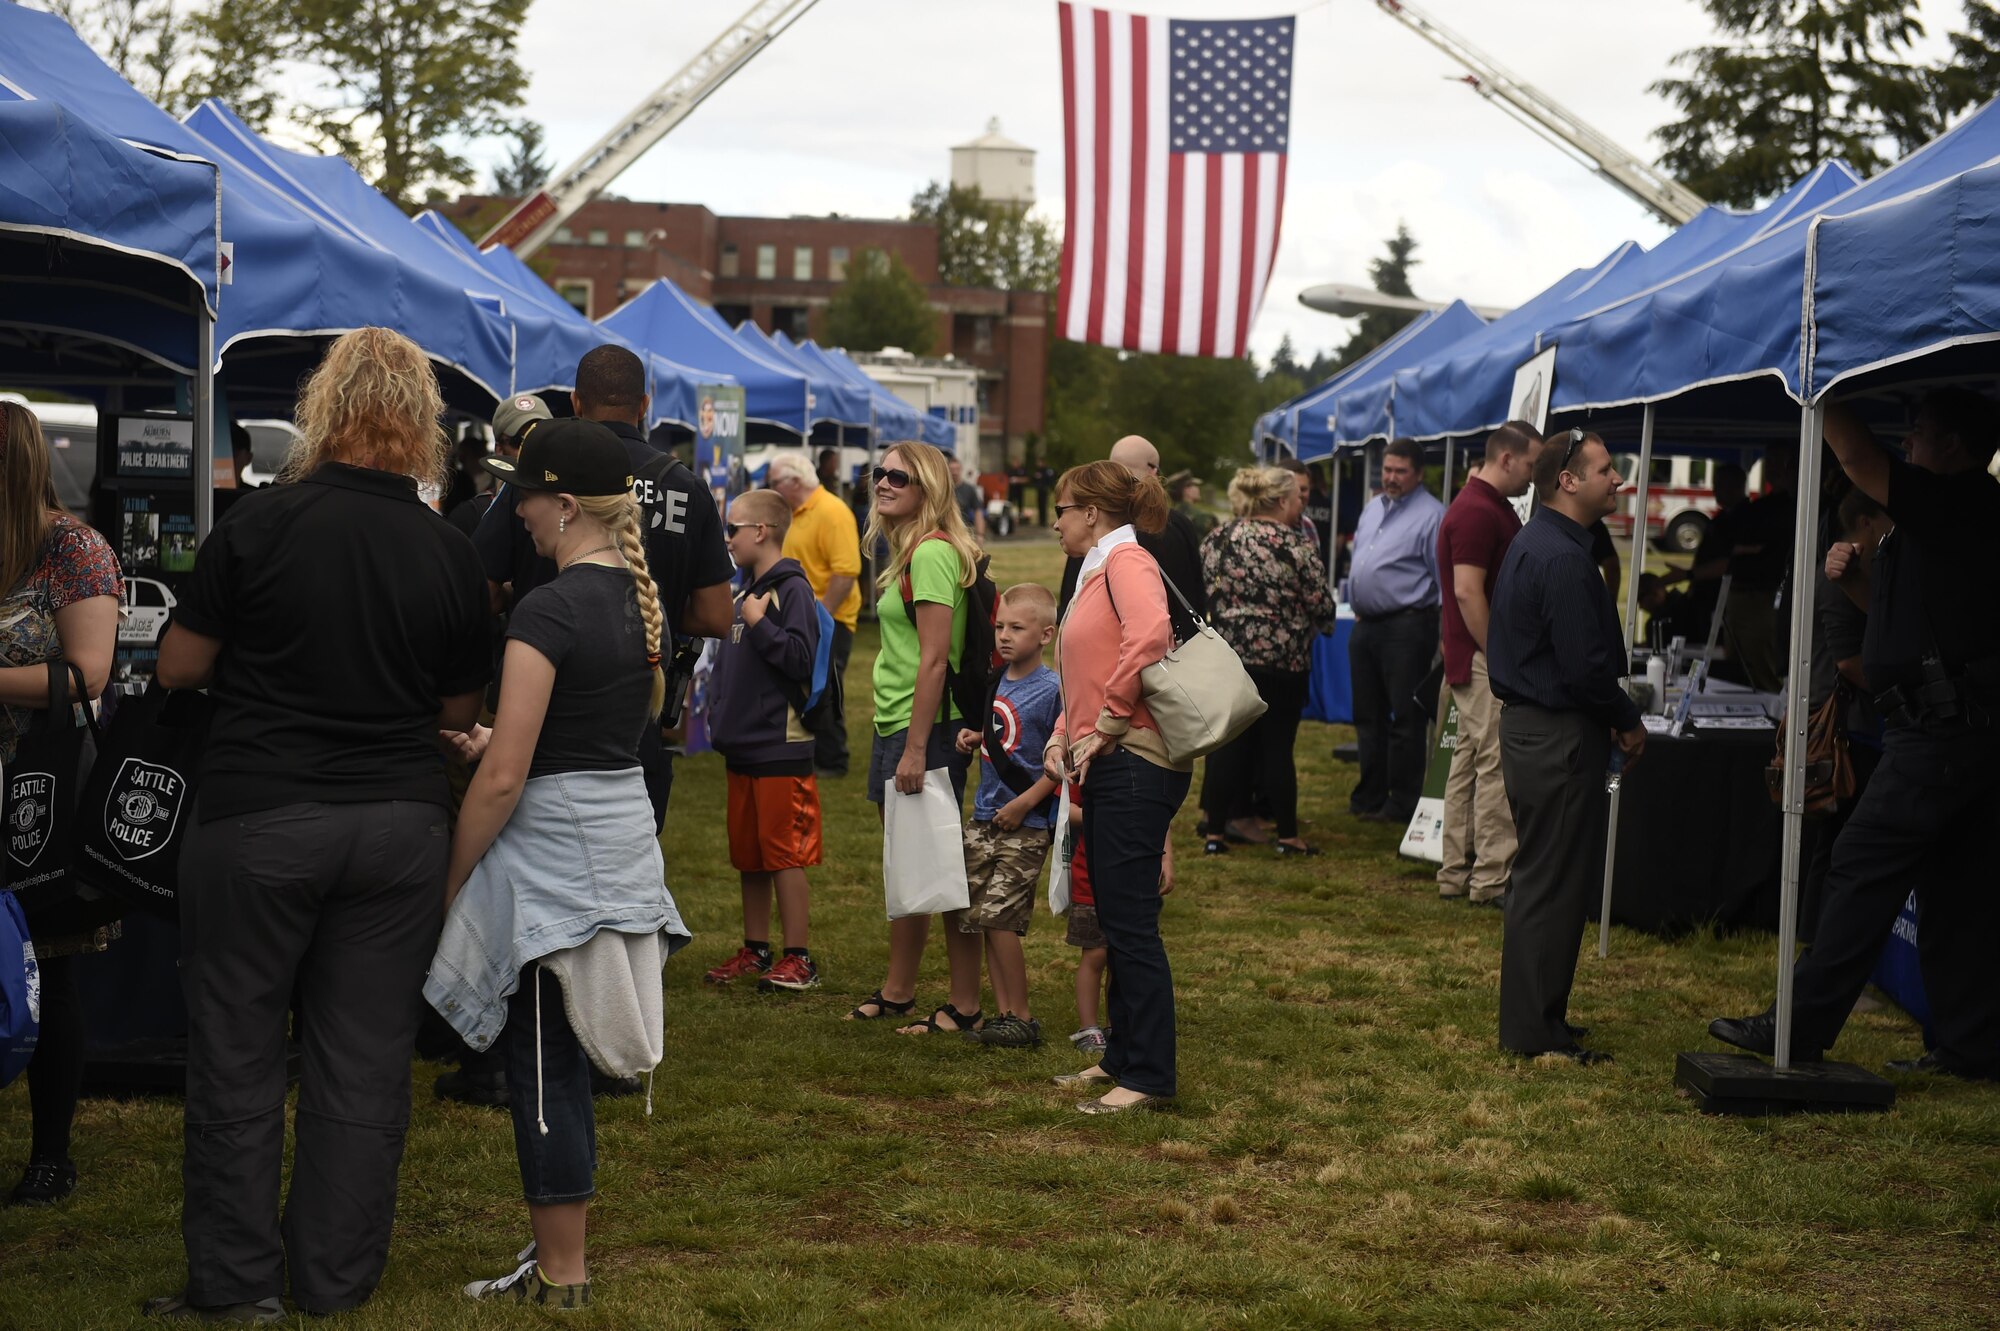 Police Officers with the Seattle Police Department mounted division, answer questions from visitors at the “Stand with Those Who Serve,” annual public safety appreciation event July 23, 2016 at Joint Base Lewis-McChord, Wash. 38 different first responder agencies participated in the event, to include city, county state and federal agencies. (U.S. Air Force photo/Tech. Sgt. Tim Chacon) 